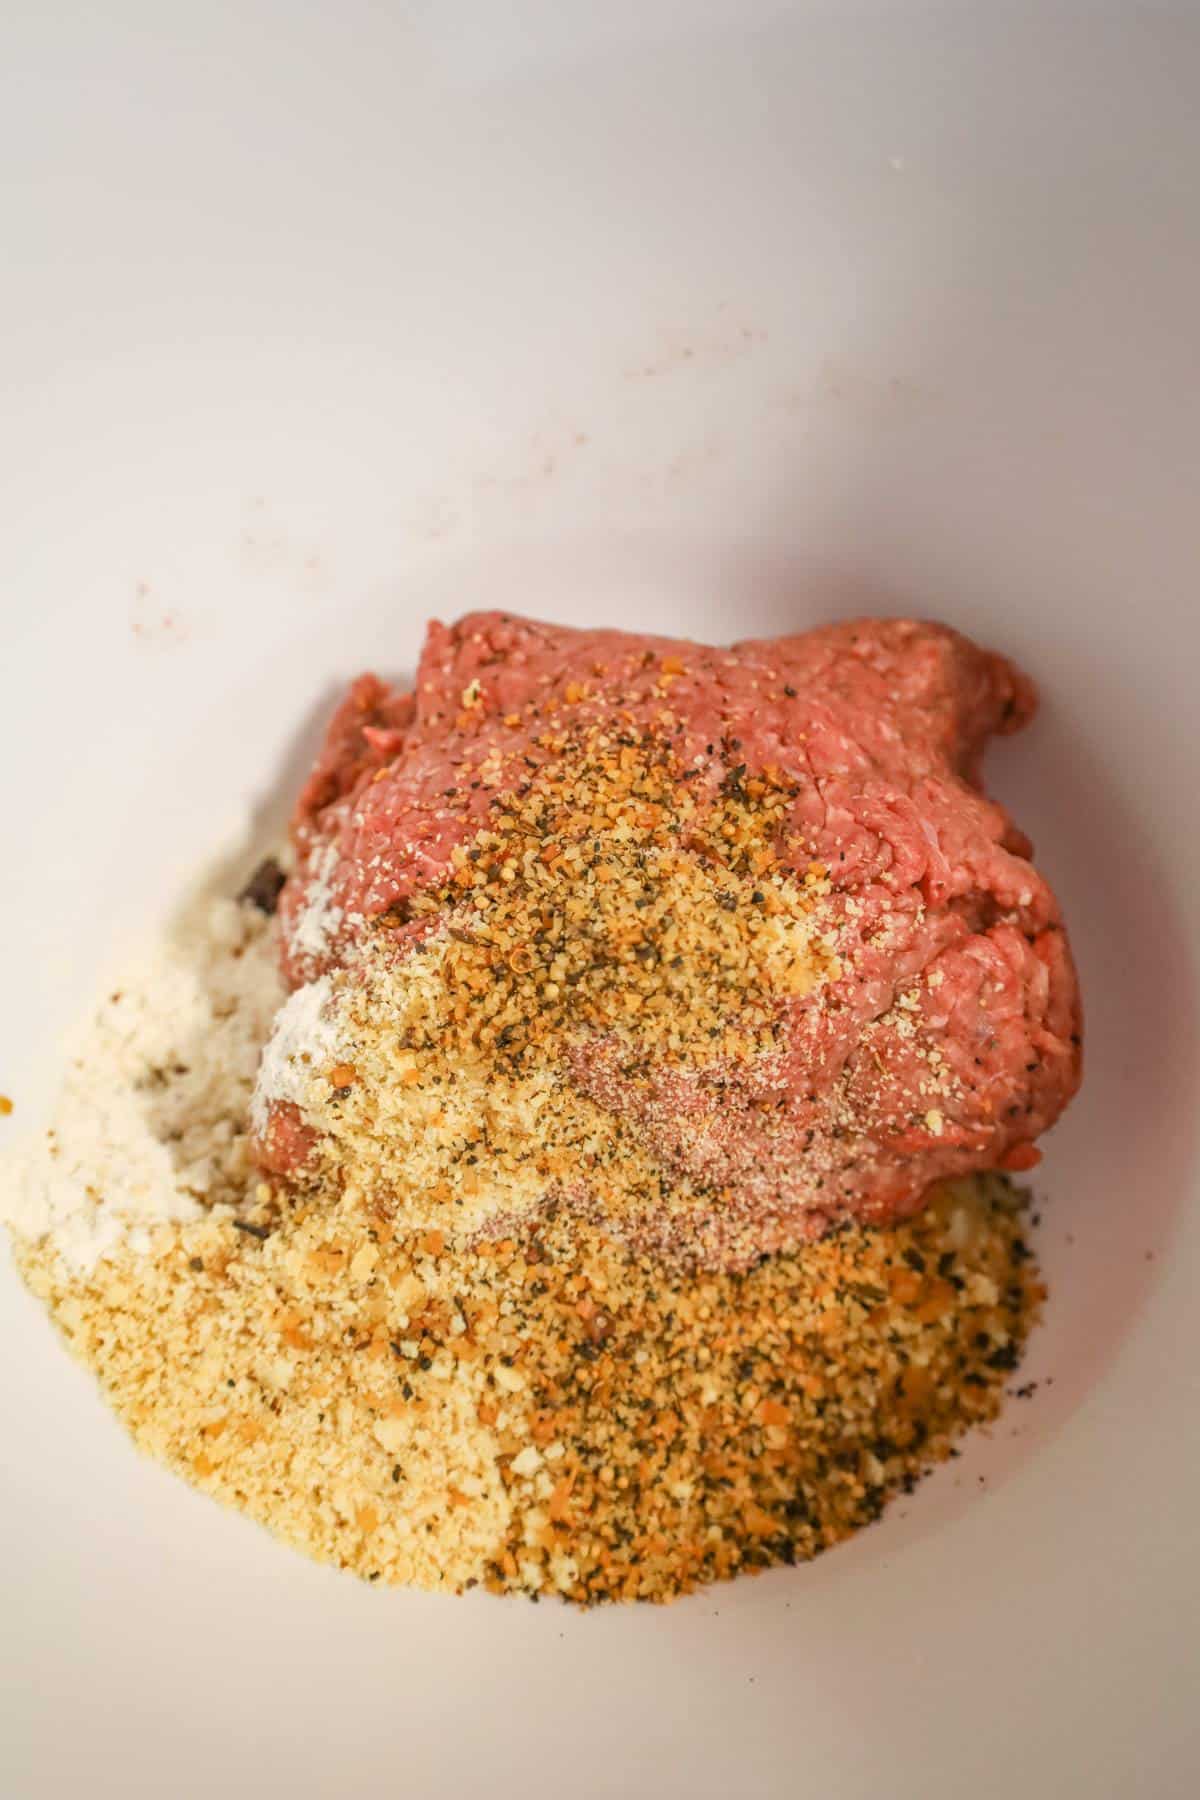 Ritz cracker crumbs and steak spice on top of raw ground beef in a mixing bowl